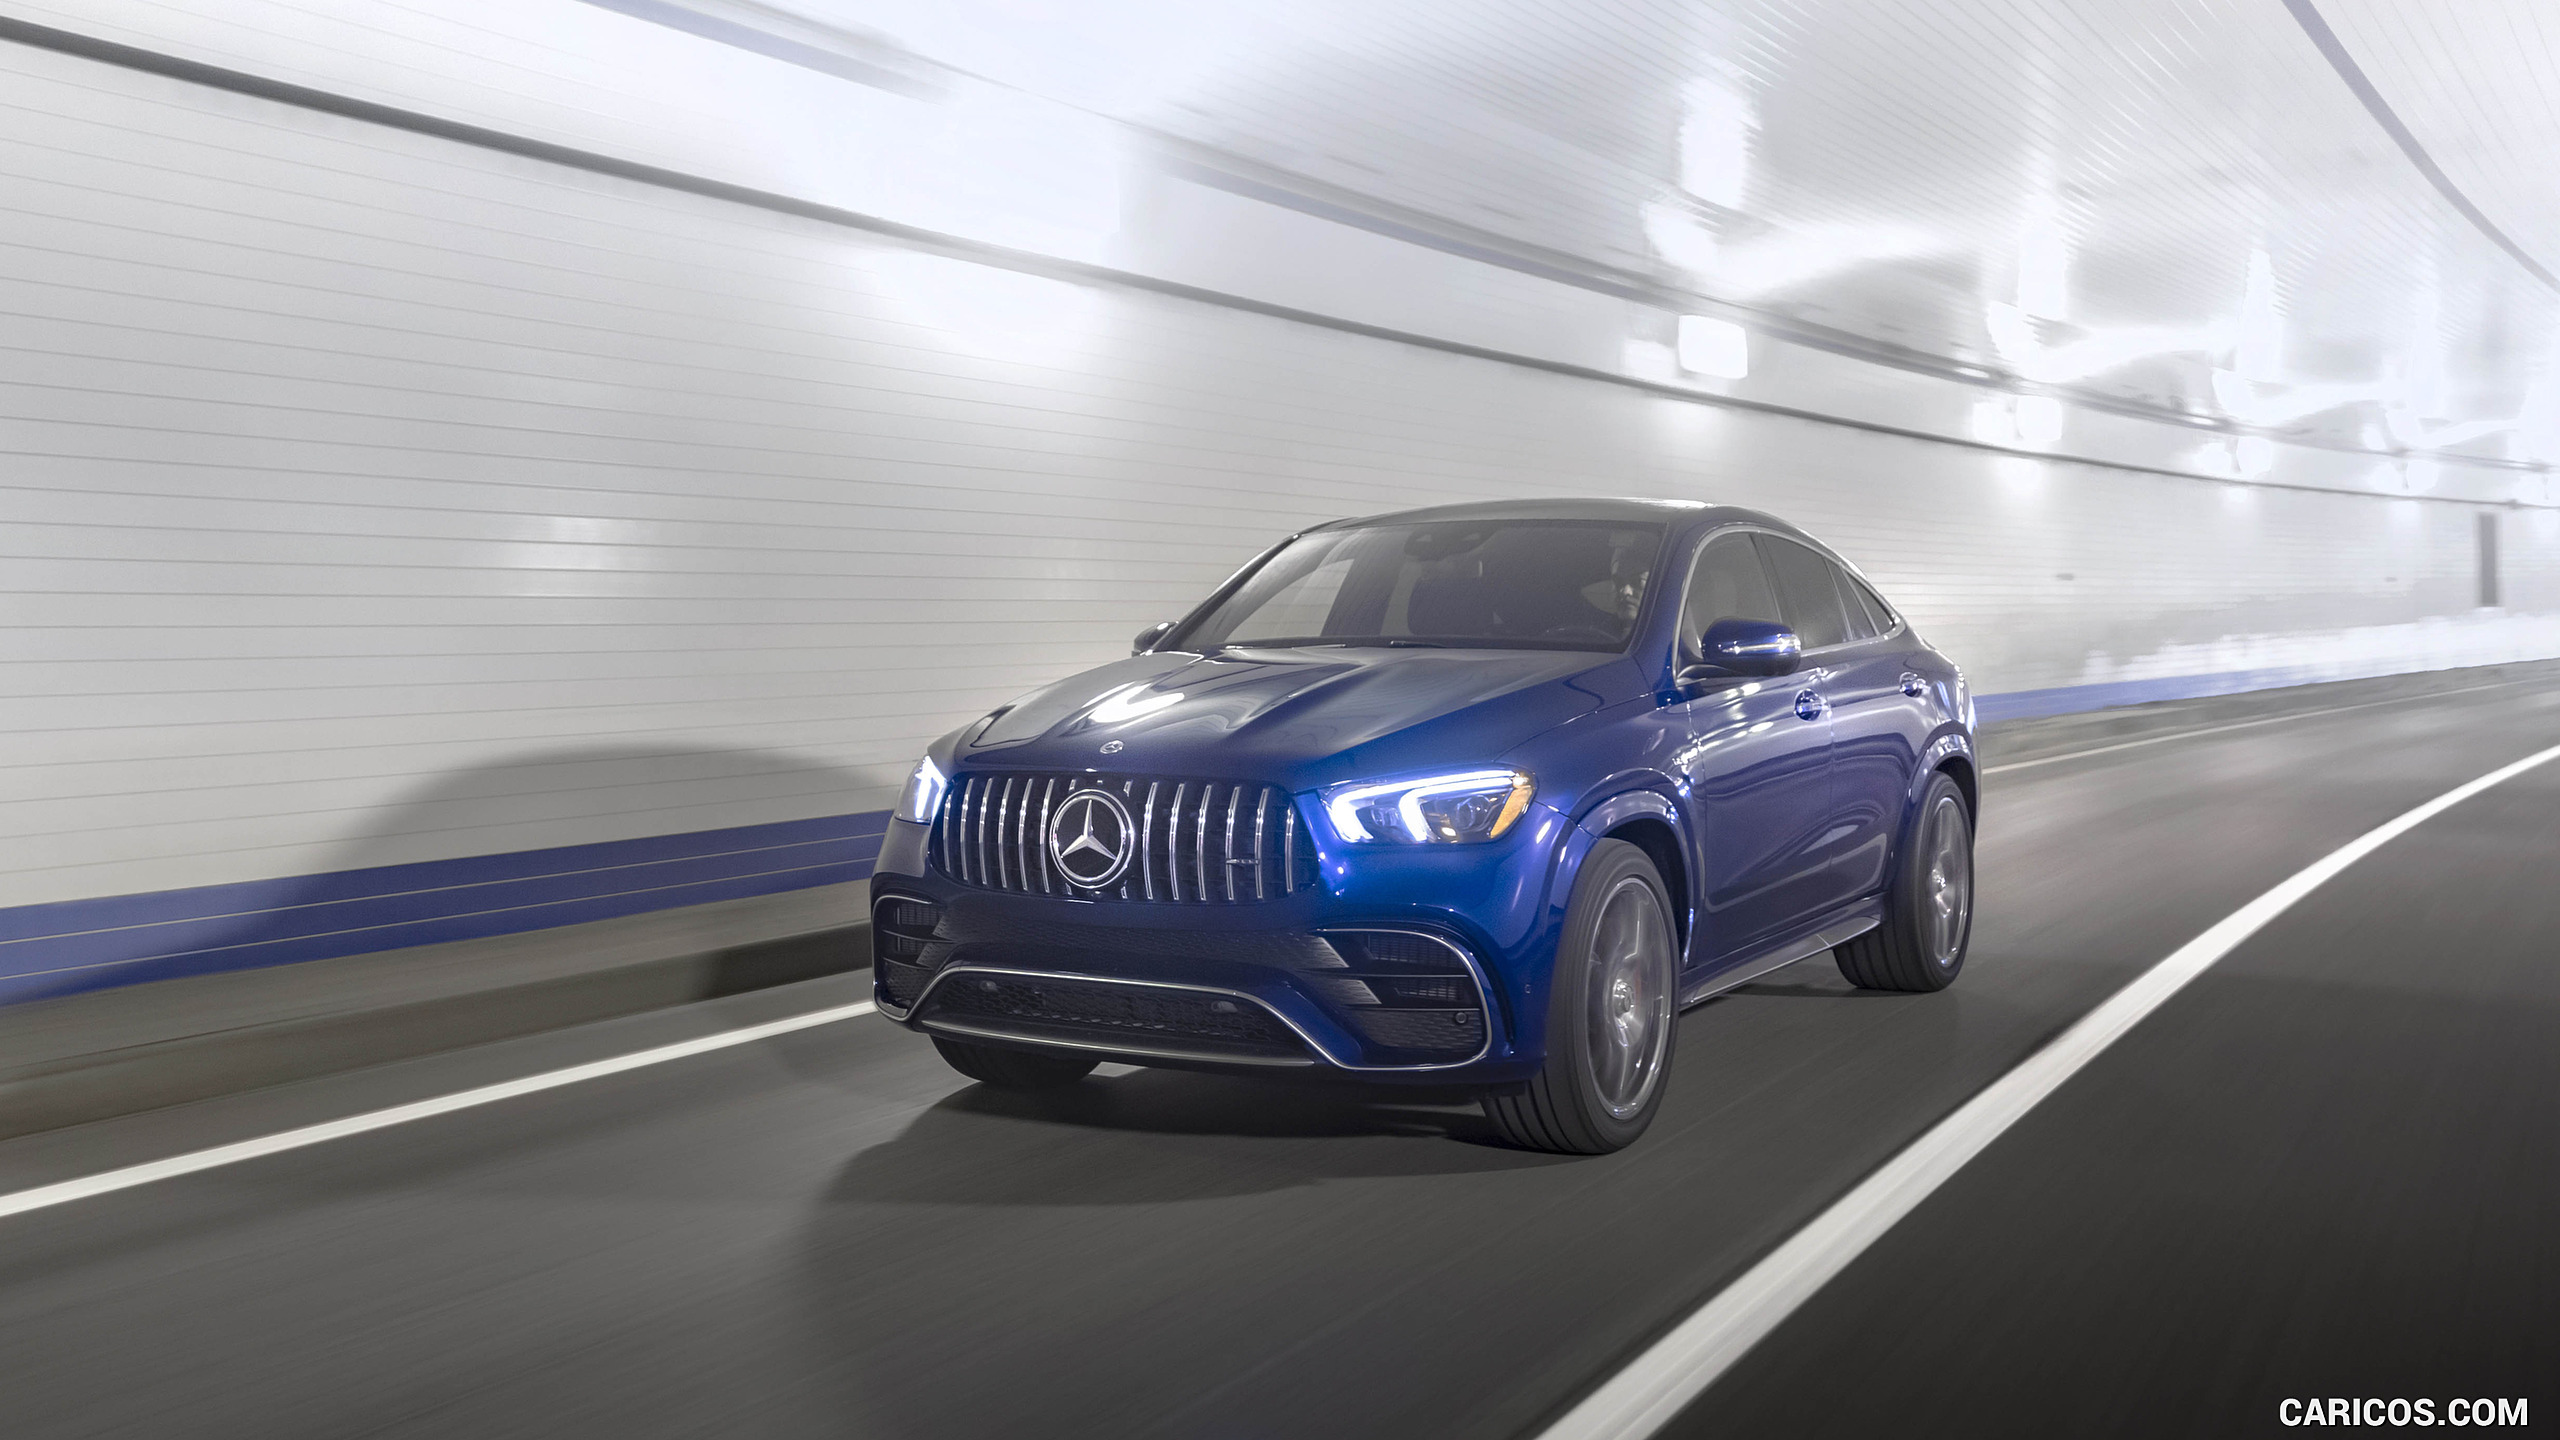 2021 Mercedes-AMG GLE 63 S Coupe (US-Spec) - Front Three-Quarter, #30 of 66